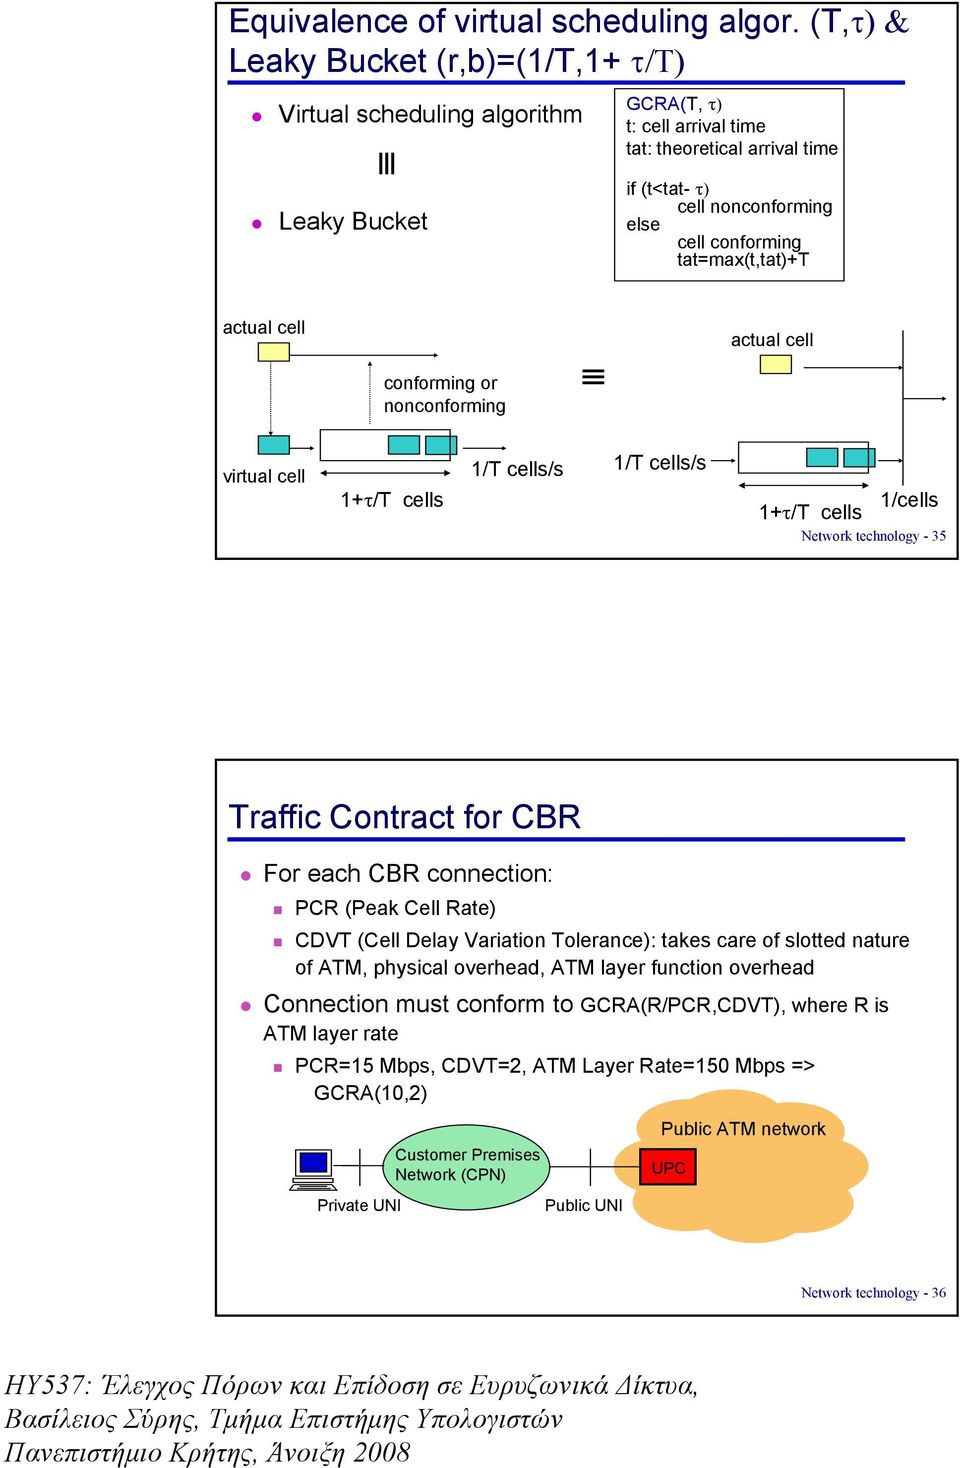 tat=max(t,tat)+t actual cell conforming or nonconforming actual cell virtual cell 1+τ/T cells 1/T cells/s 1/T cells/s 1+τ/T cells 1/cells Network technology - 35 Traffic Contract for CBR For each CBR